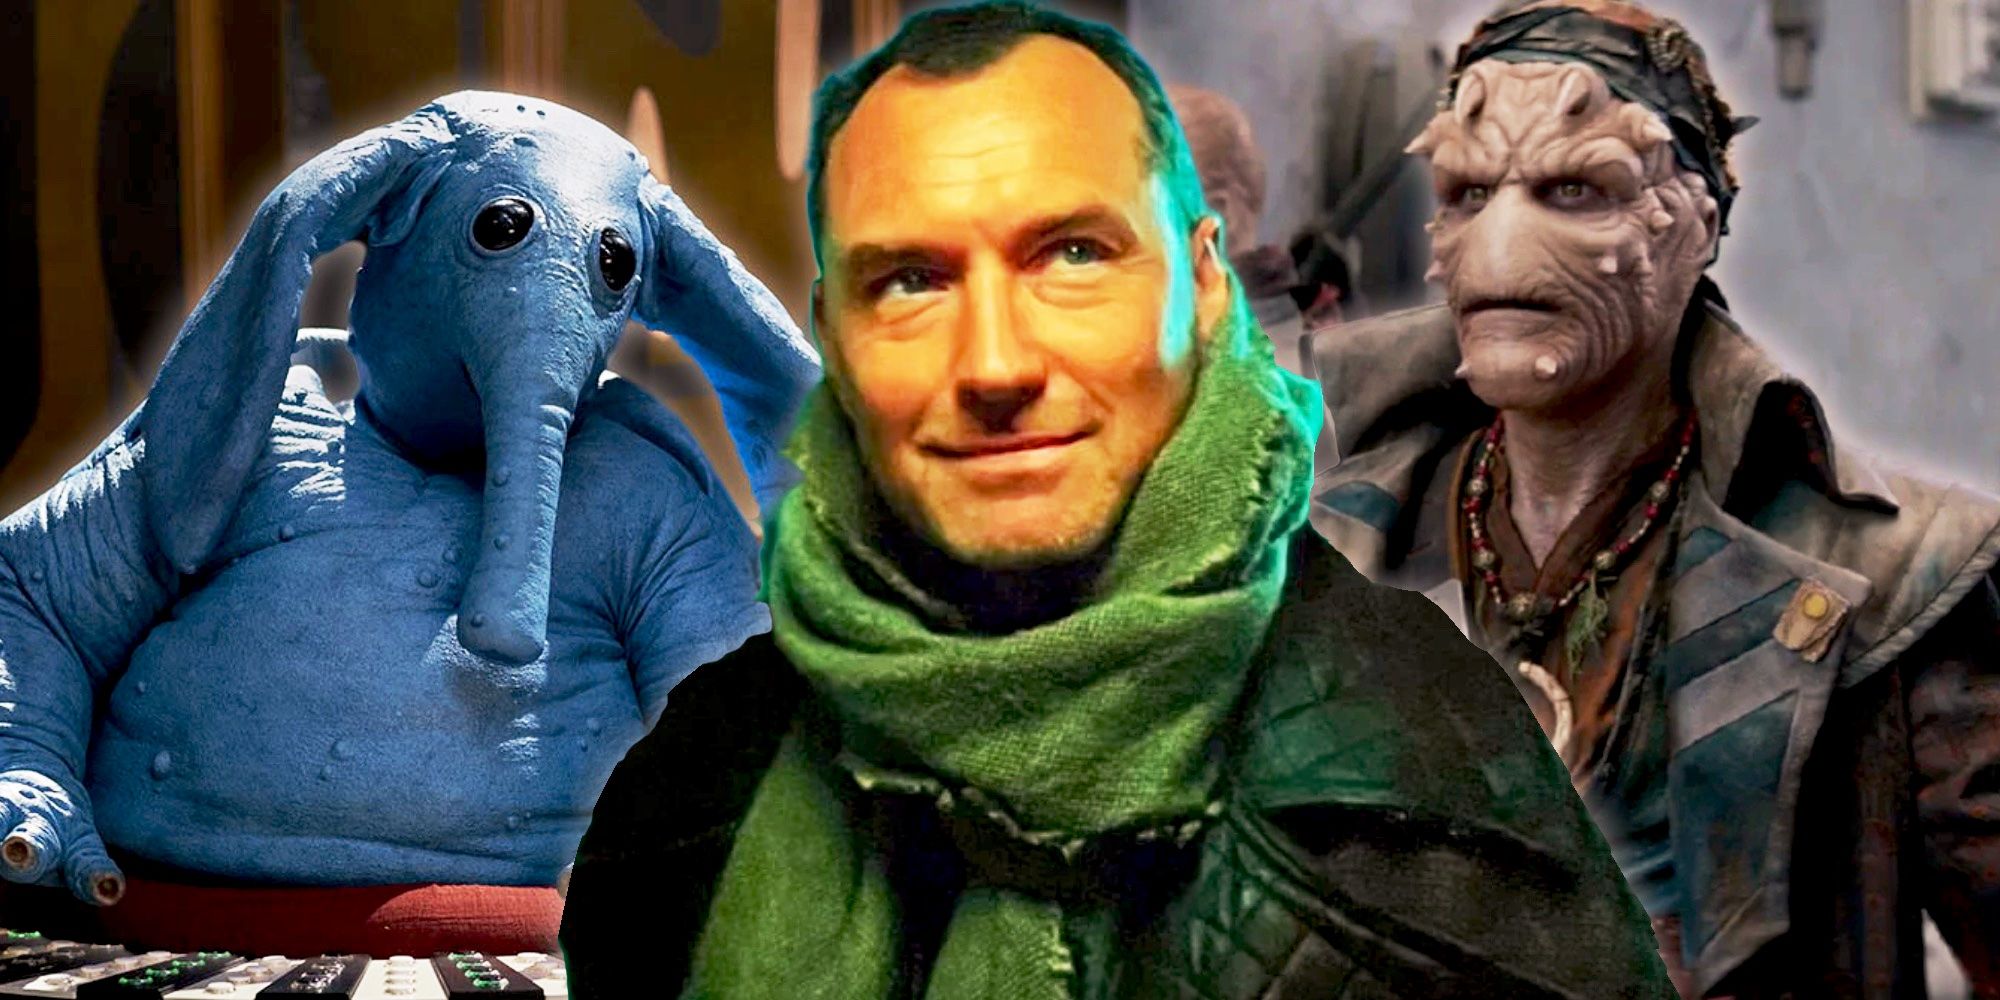 Jude Law's character, Max Rebo, and Vane the pirate.